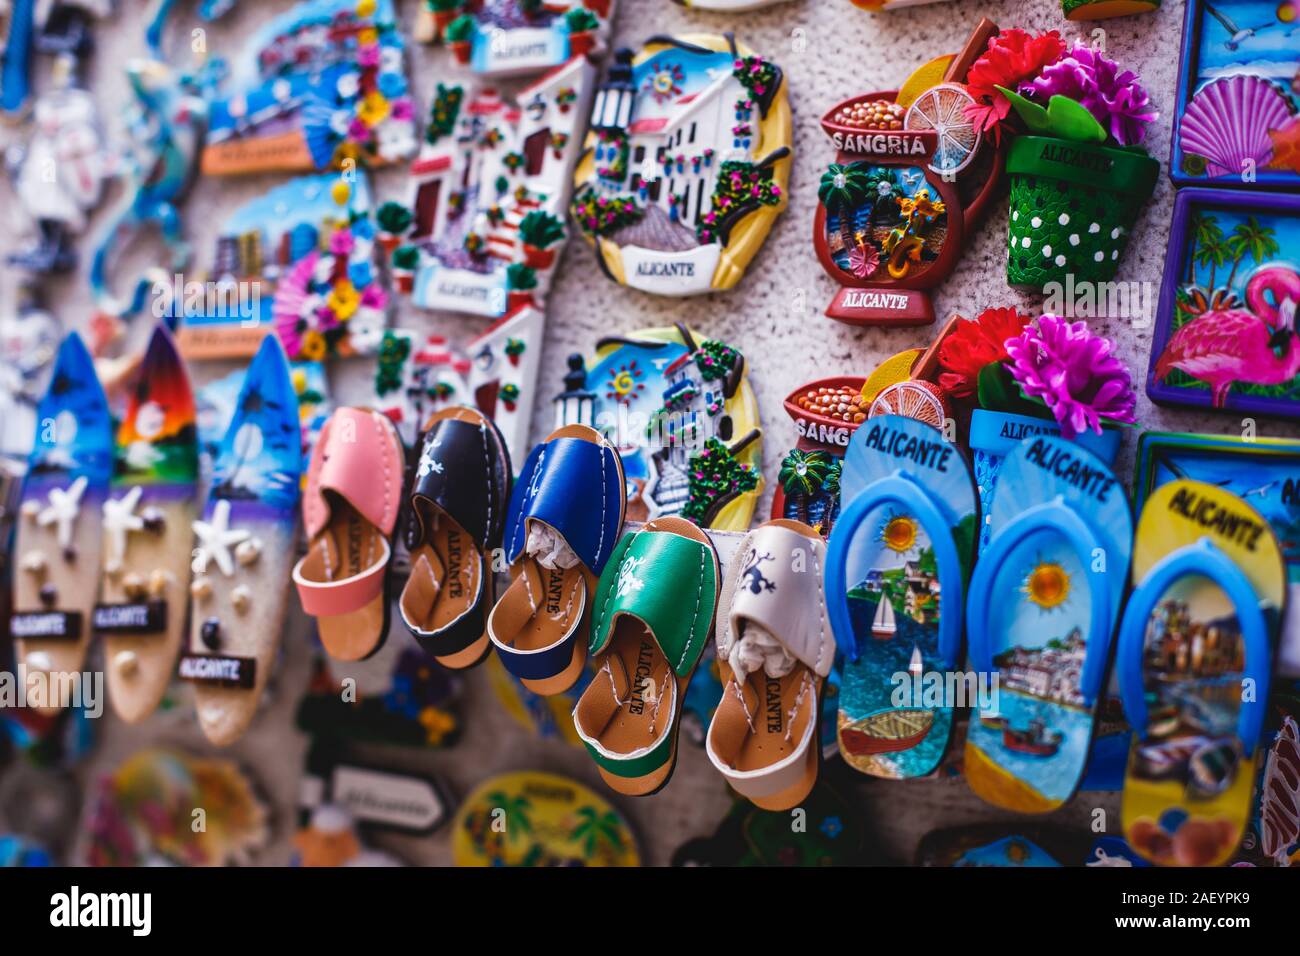 View of traditional tourist souvenirs and gifts from Spain, Alicante, Valencia with toys, bull figures, flamenco dancer dolls, fridge magnets with and Stock Photo